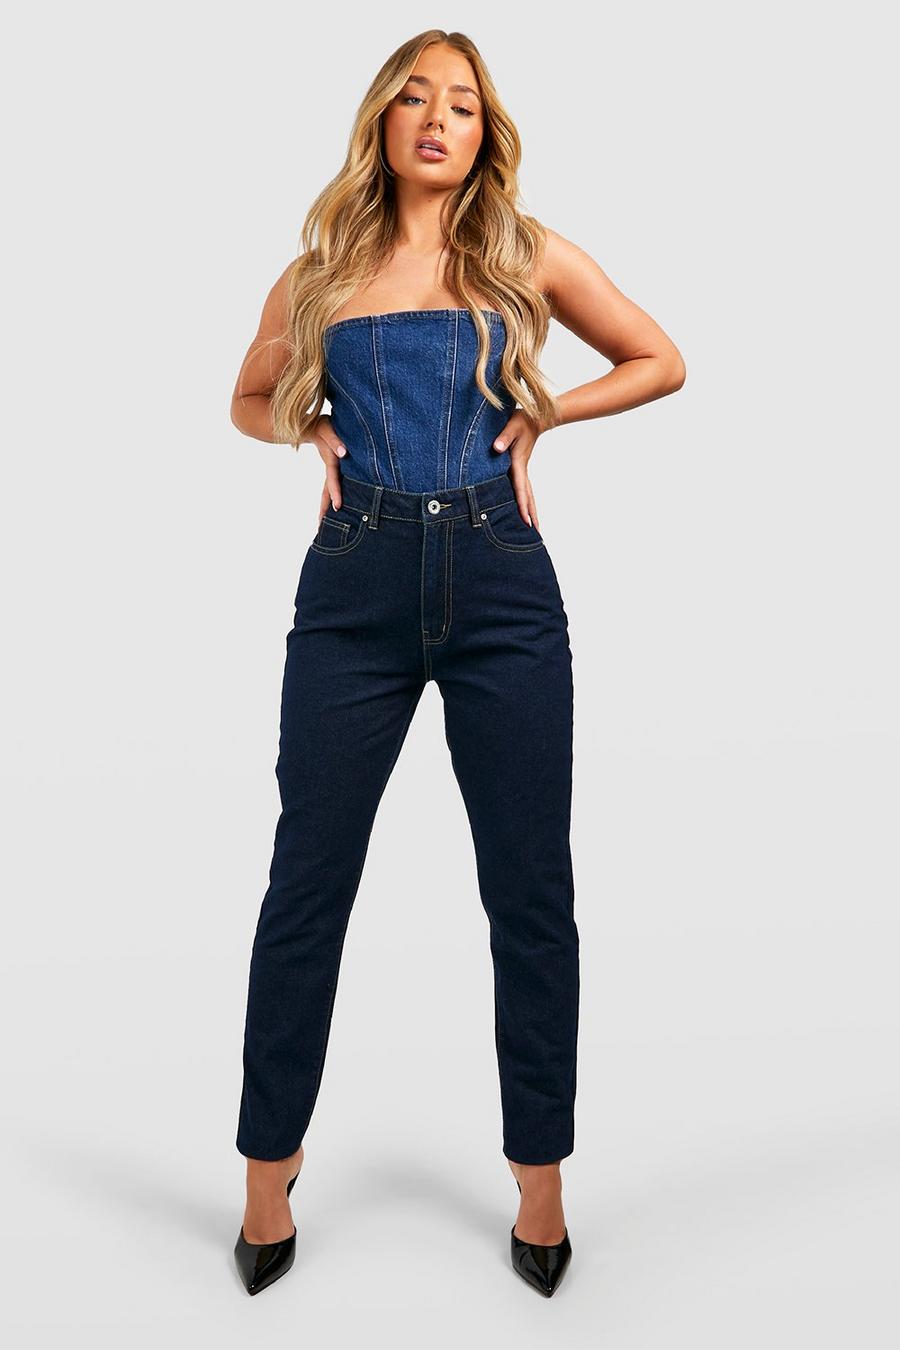 Mom Jeans  Women's Mom Style & Retro Fit Jeans